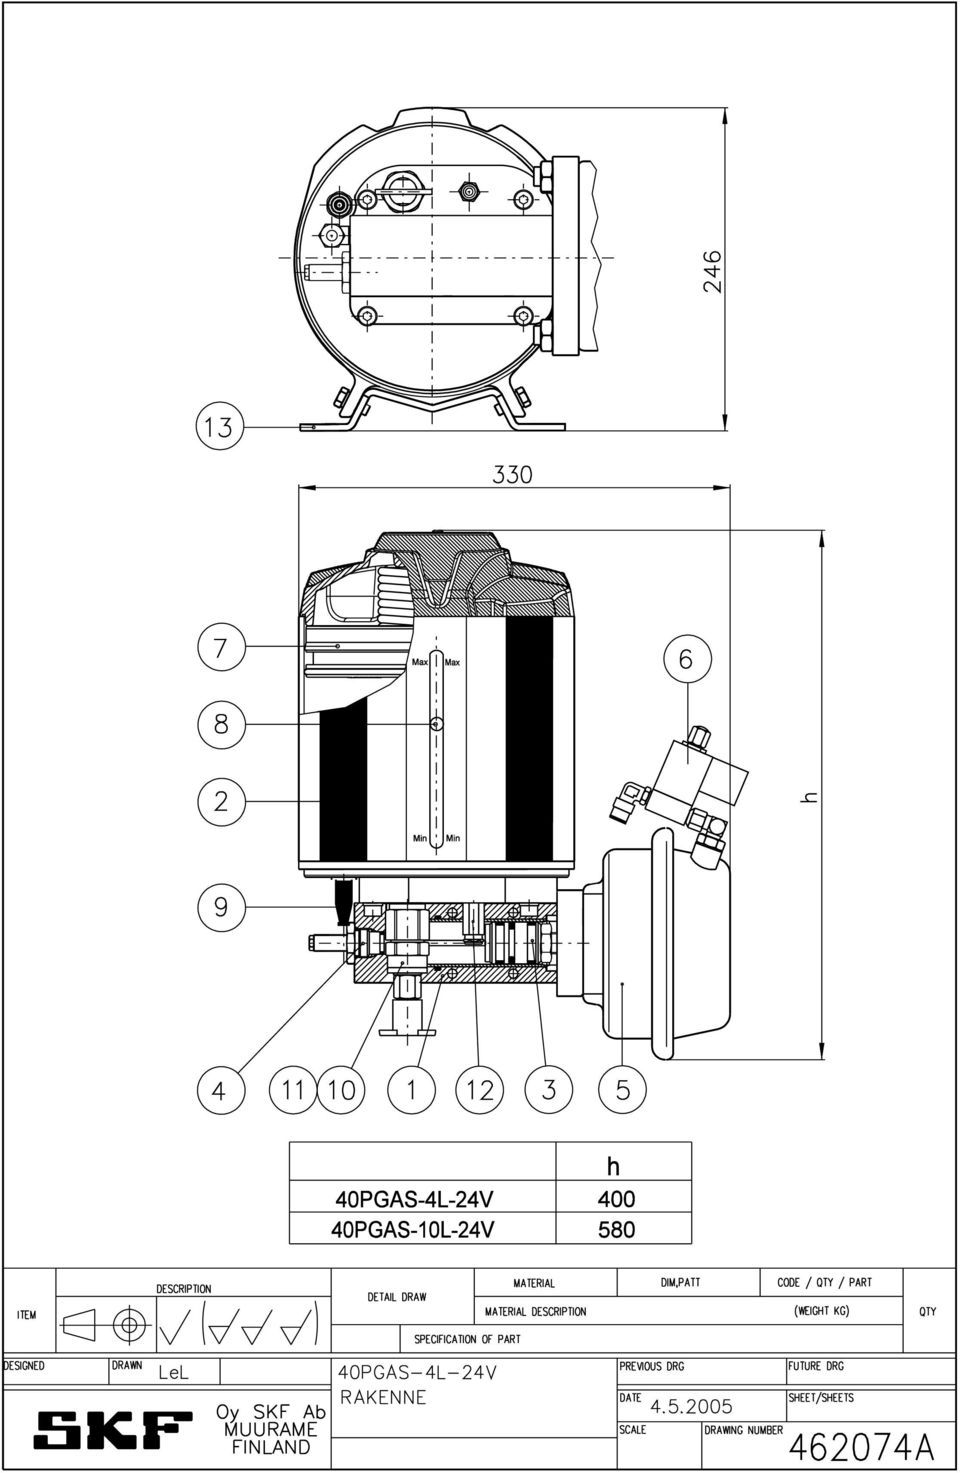 (WEIGHT KG) QTY SPECIFICATION OF PART DESIGNED DRAWN LeL 40PGAS-4L-24V PREVIOUS DRG FUTURE